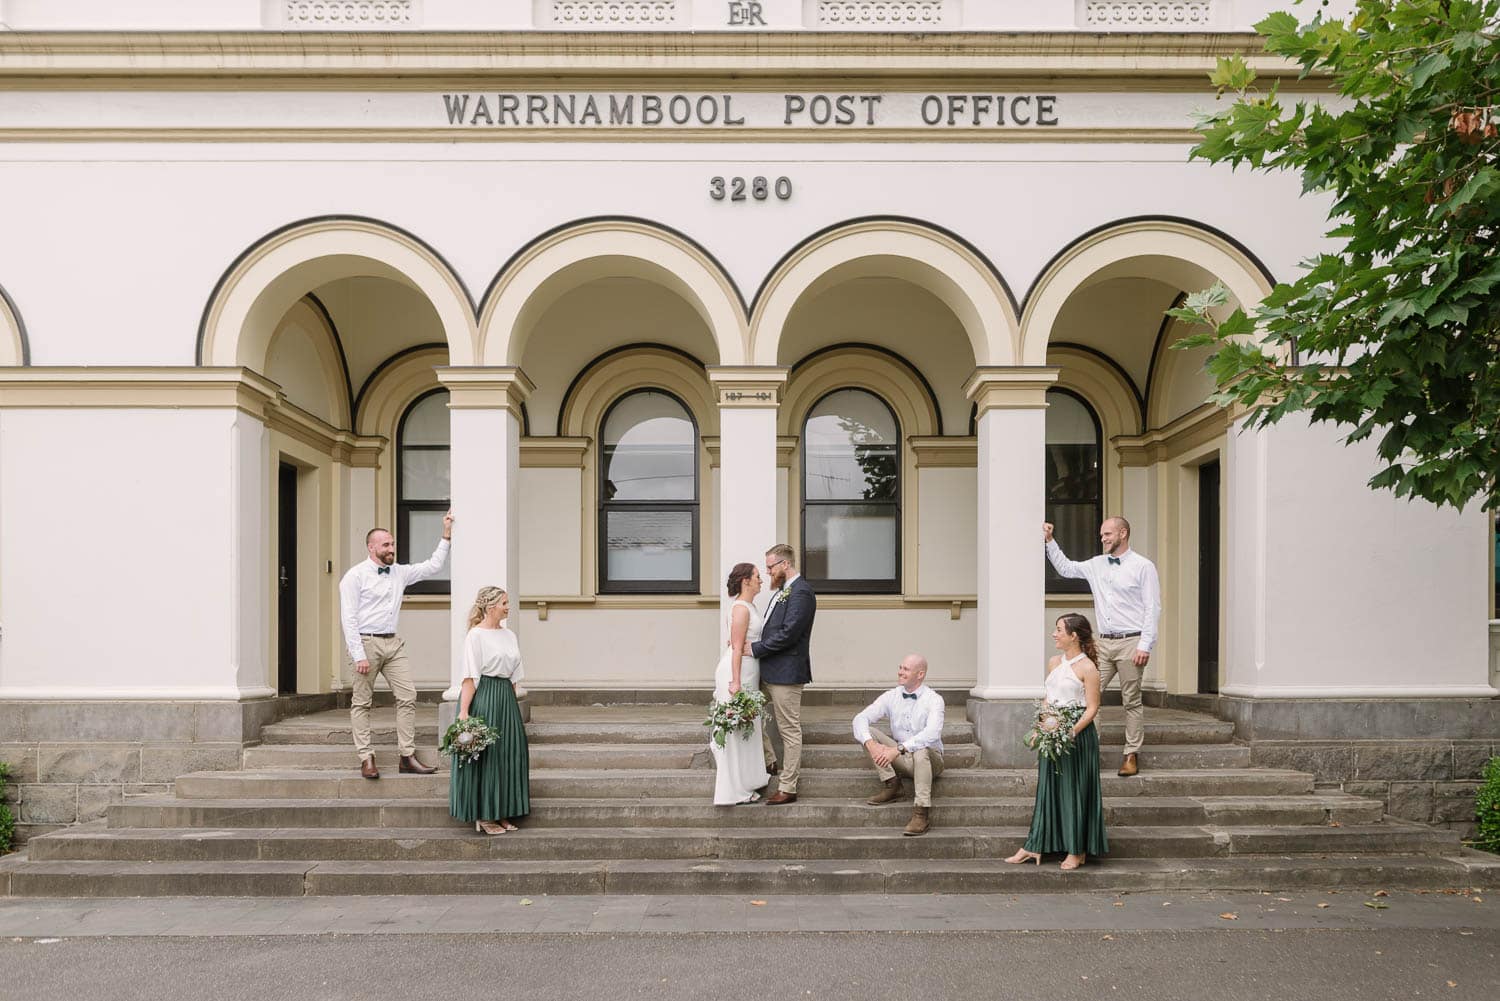 Warrnambool has some of the best wedding venues in Victoria